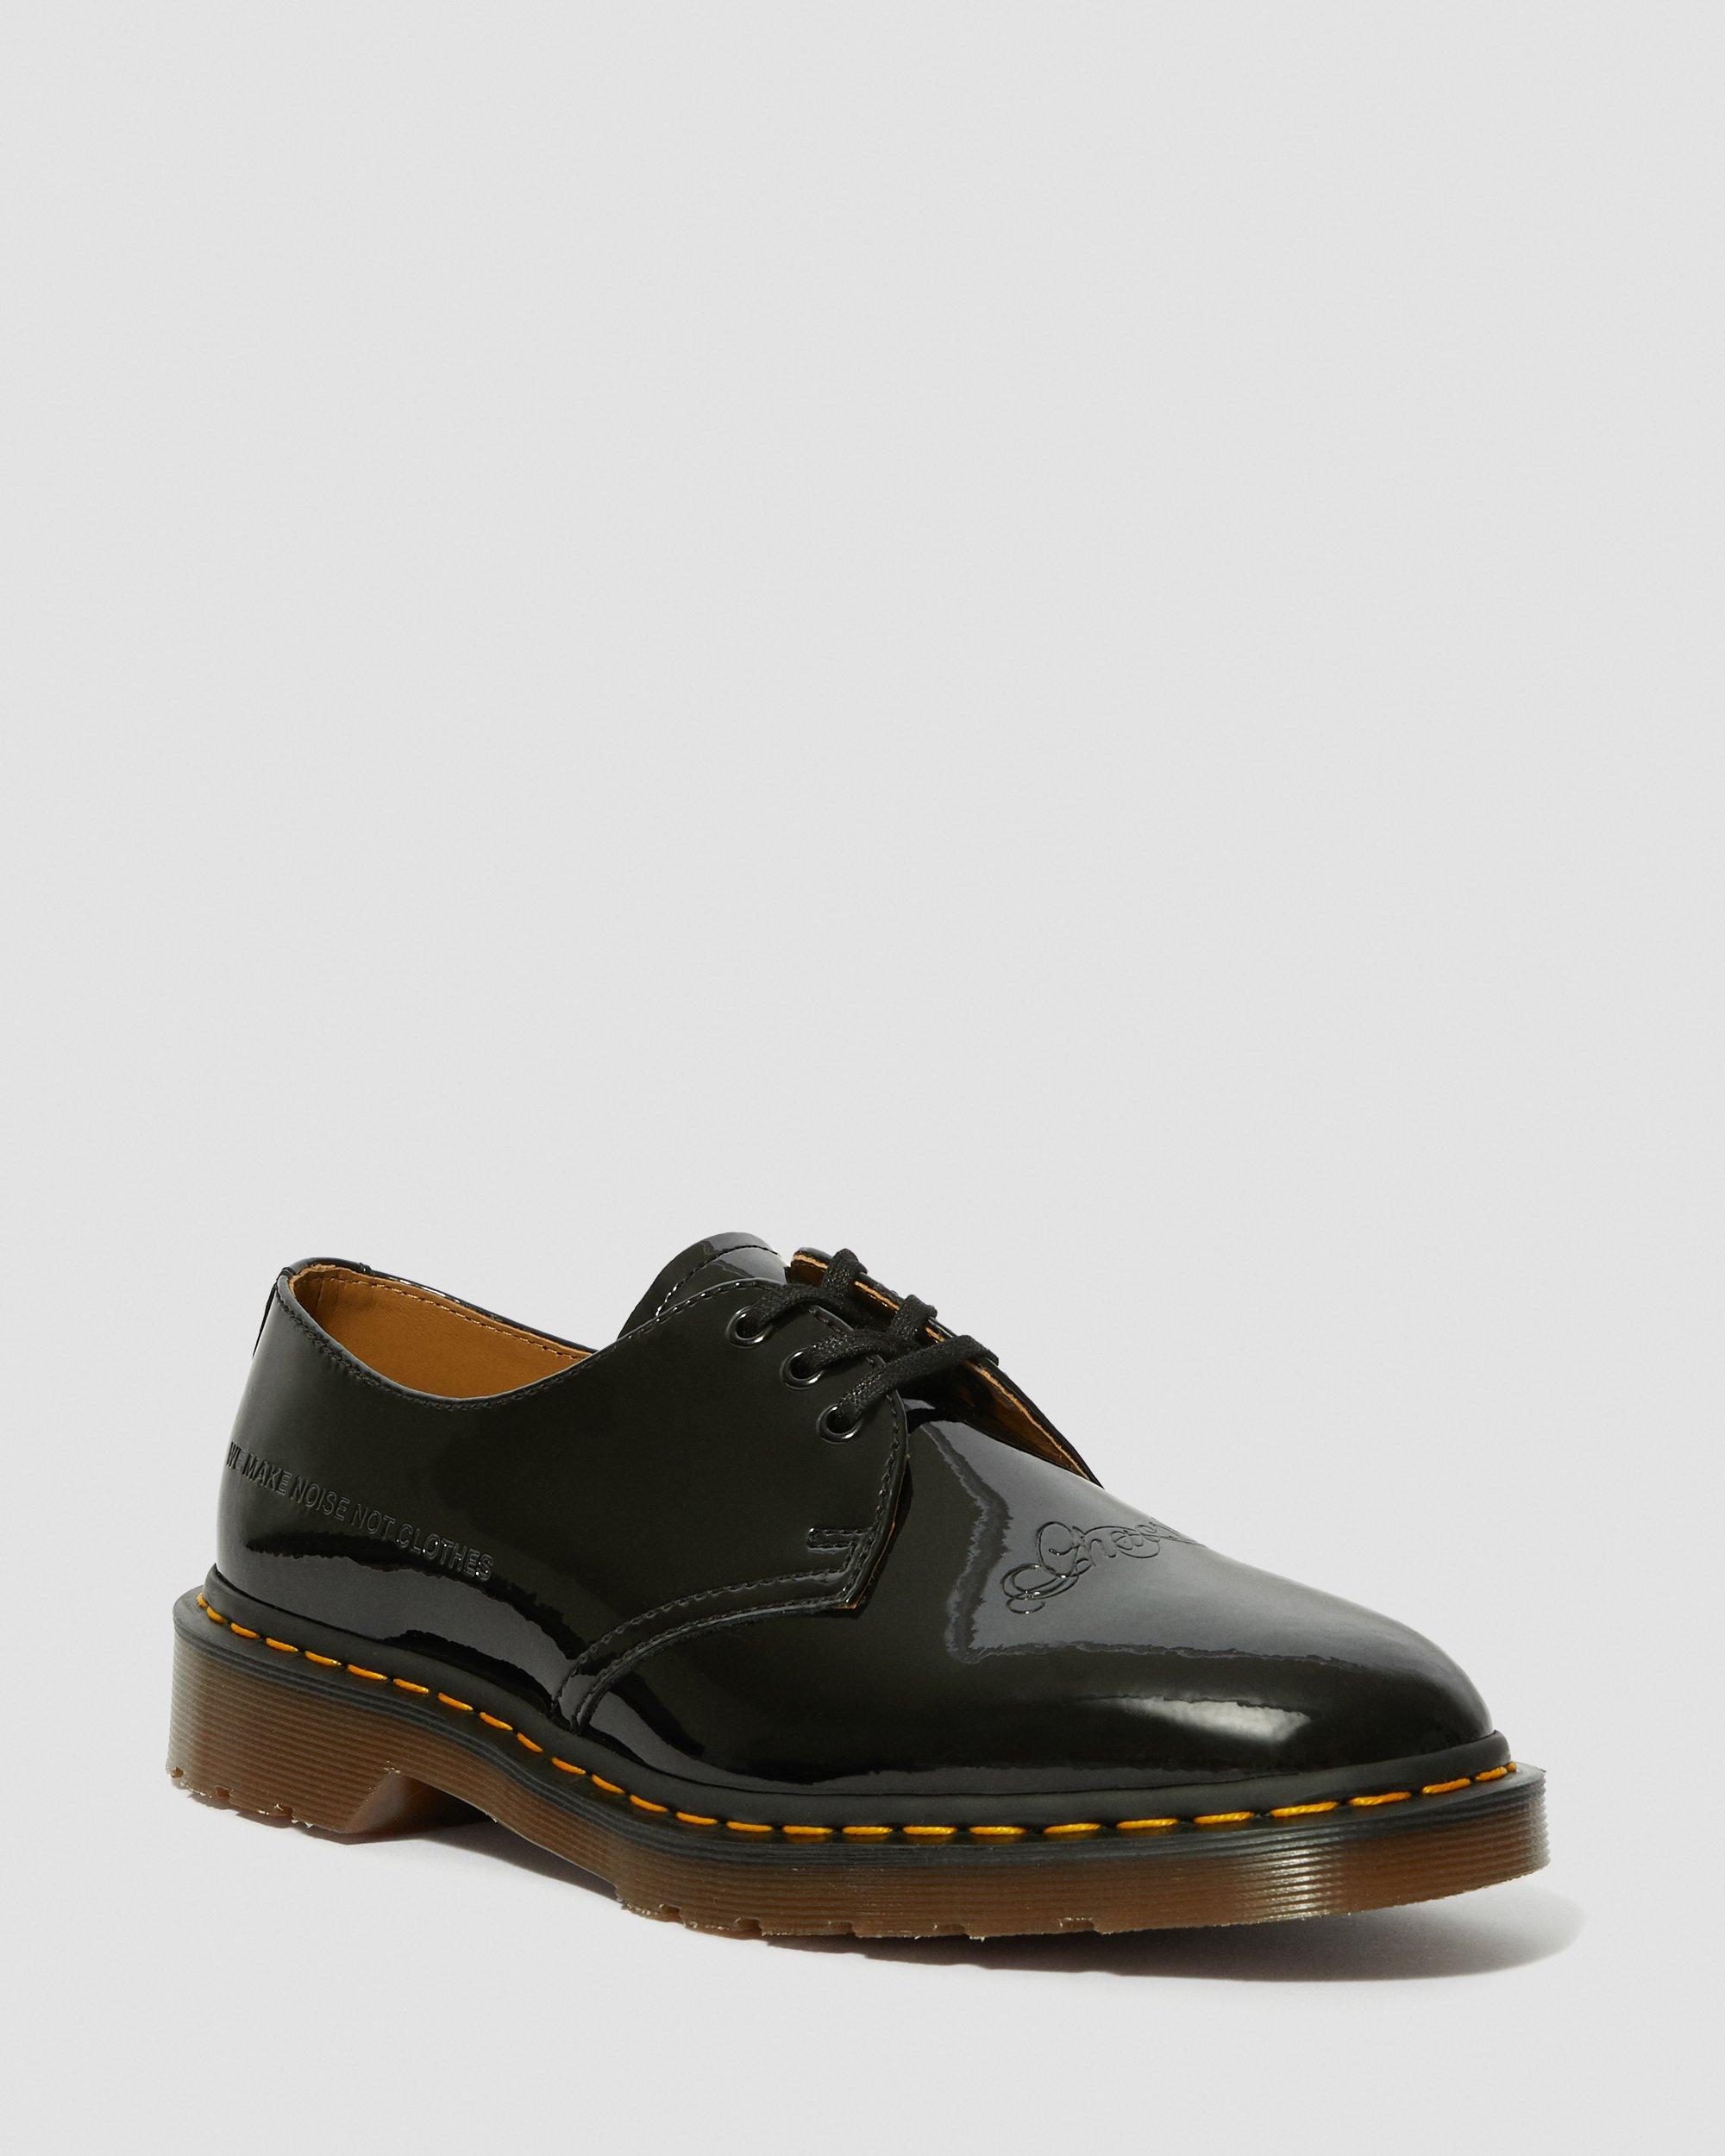 Undercover 1461 Emboss Patent in Black | Dr. Martens